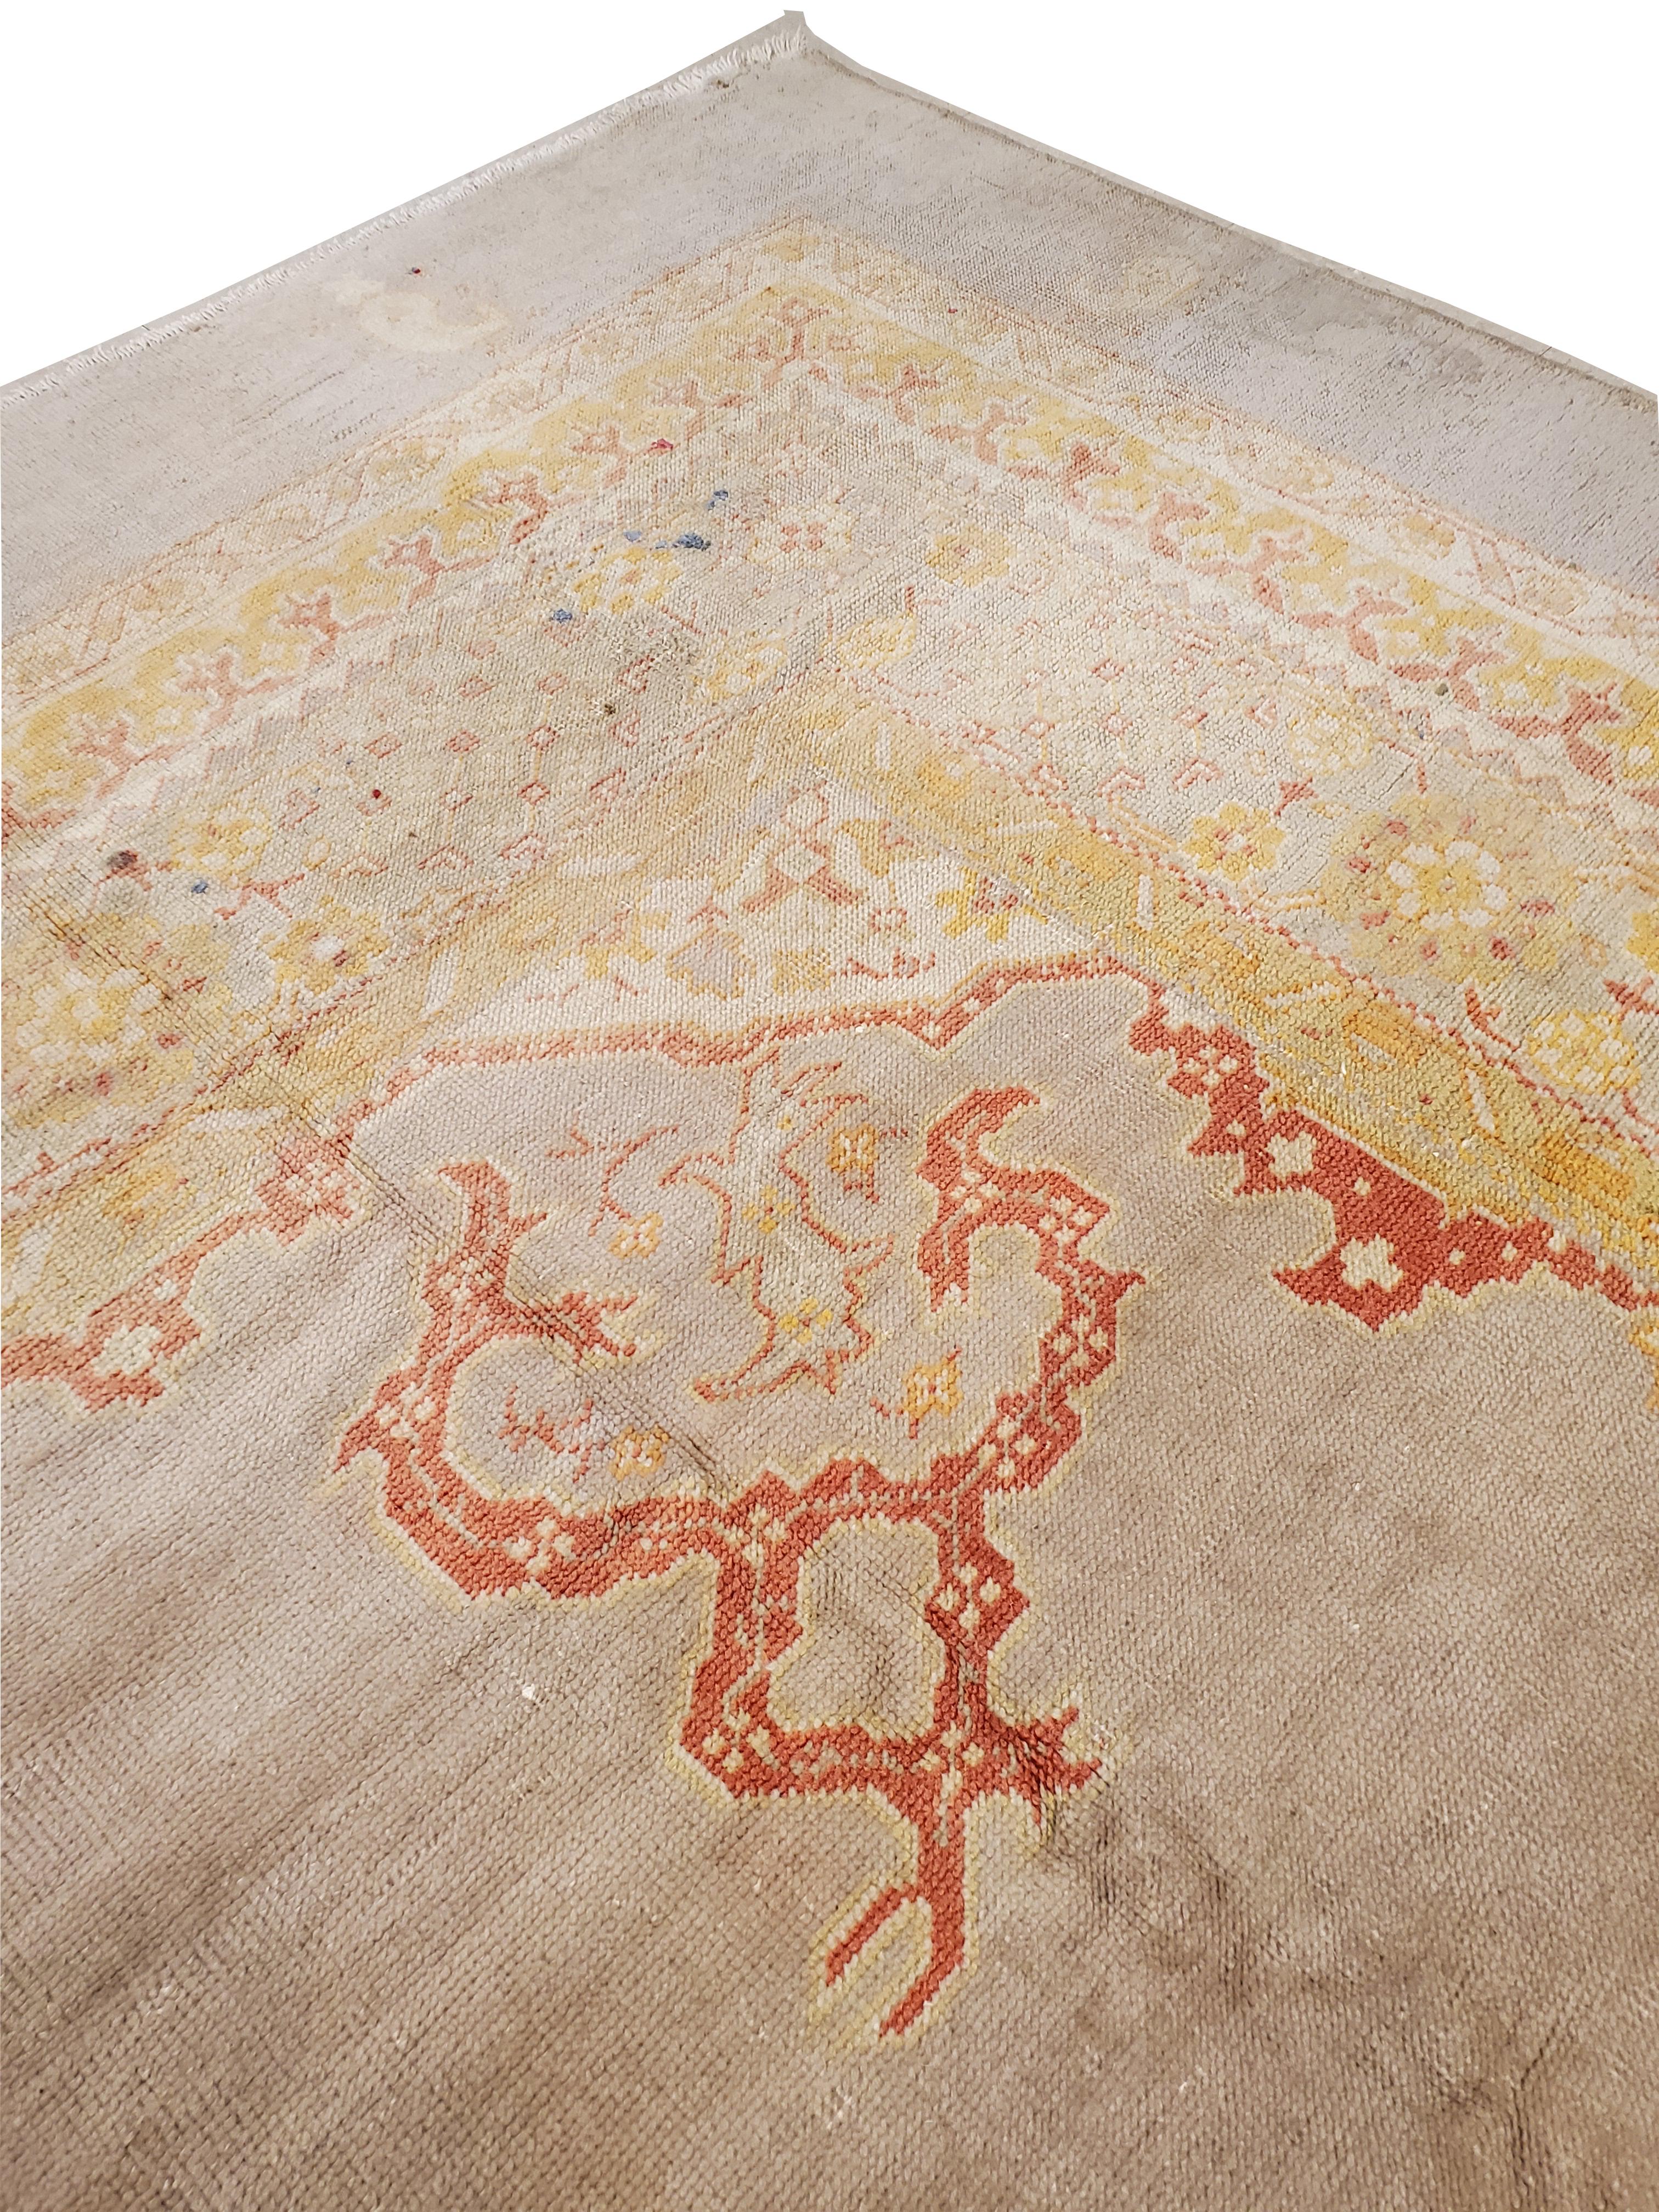 Hand-Knotted Antique Turkish Oushak Carpet, Handmade Oriental Rug, Gray, Taupe, Saffron Coral